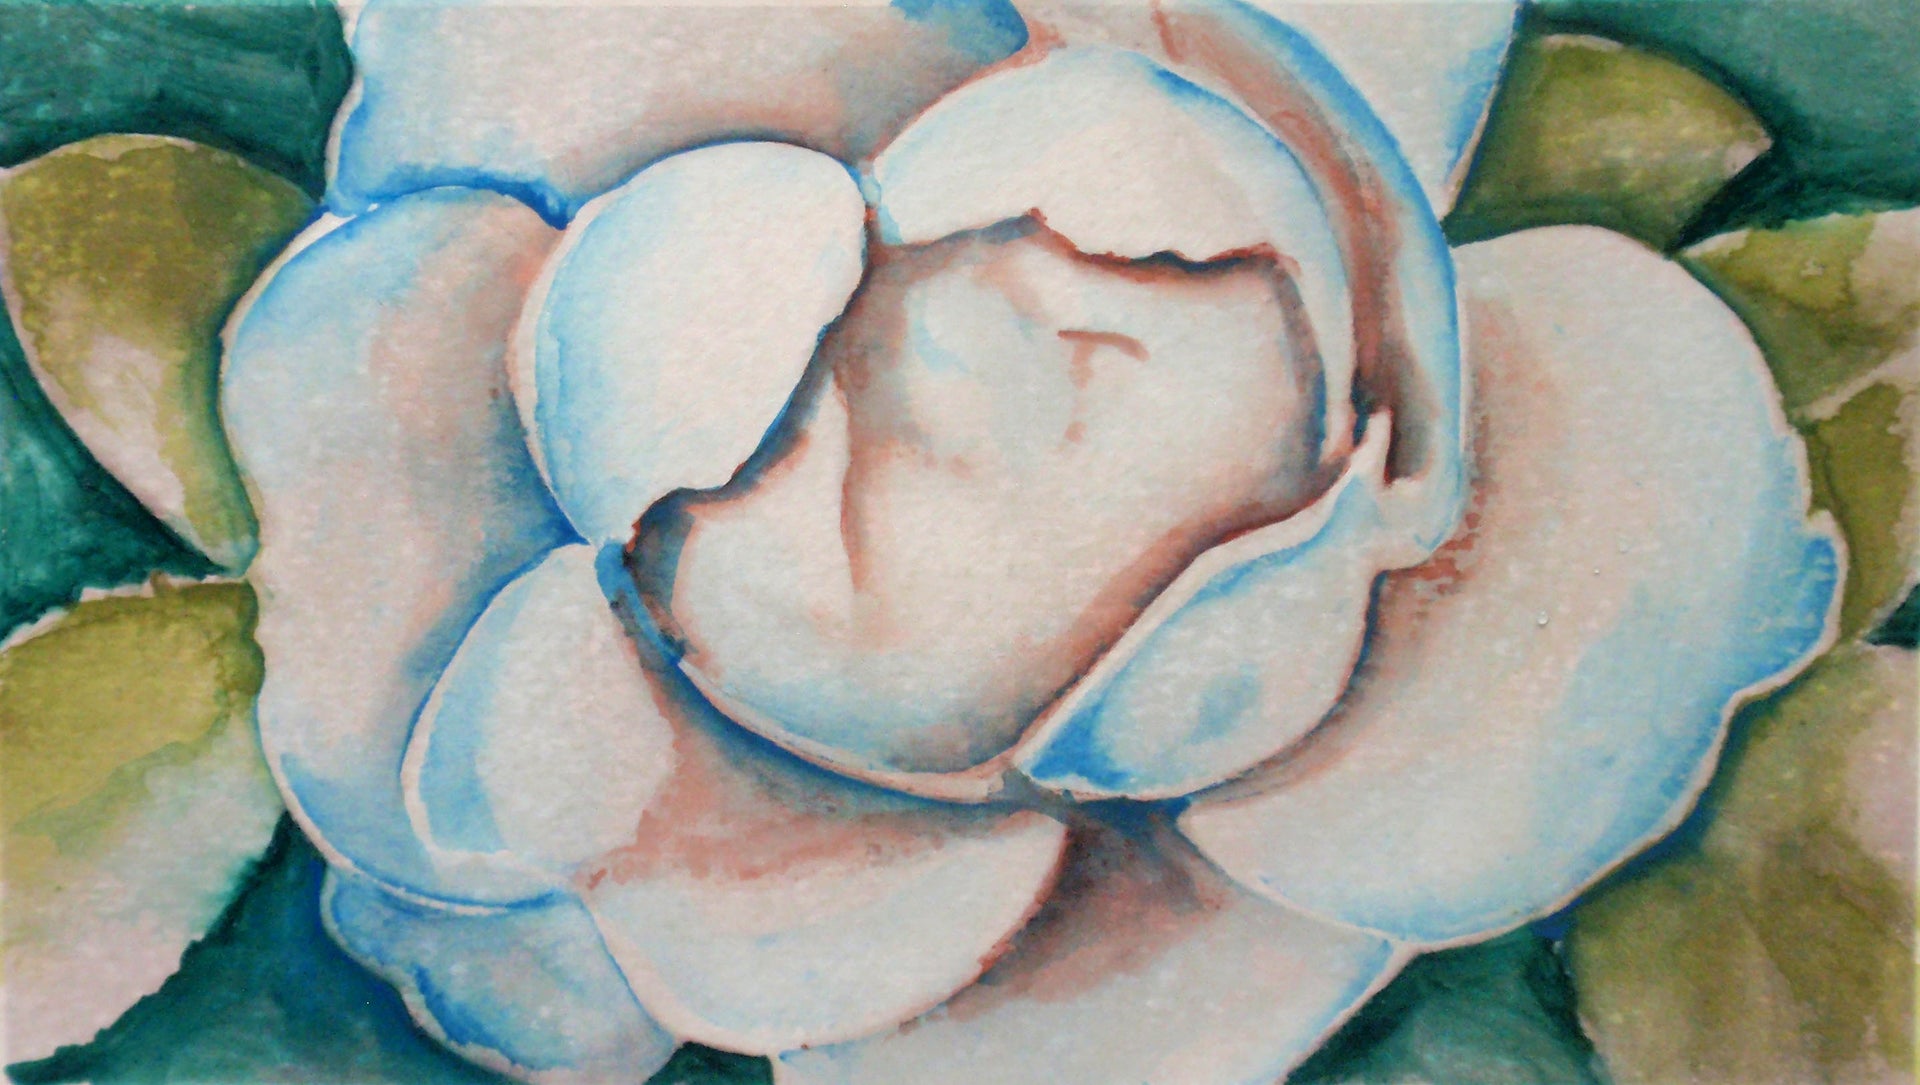 Nature Close-Ups: Easy Watercolor Paint Project